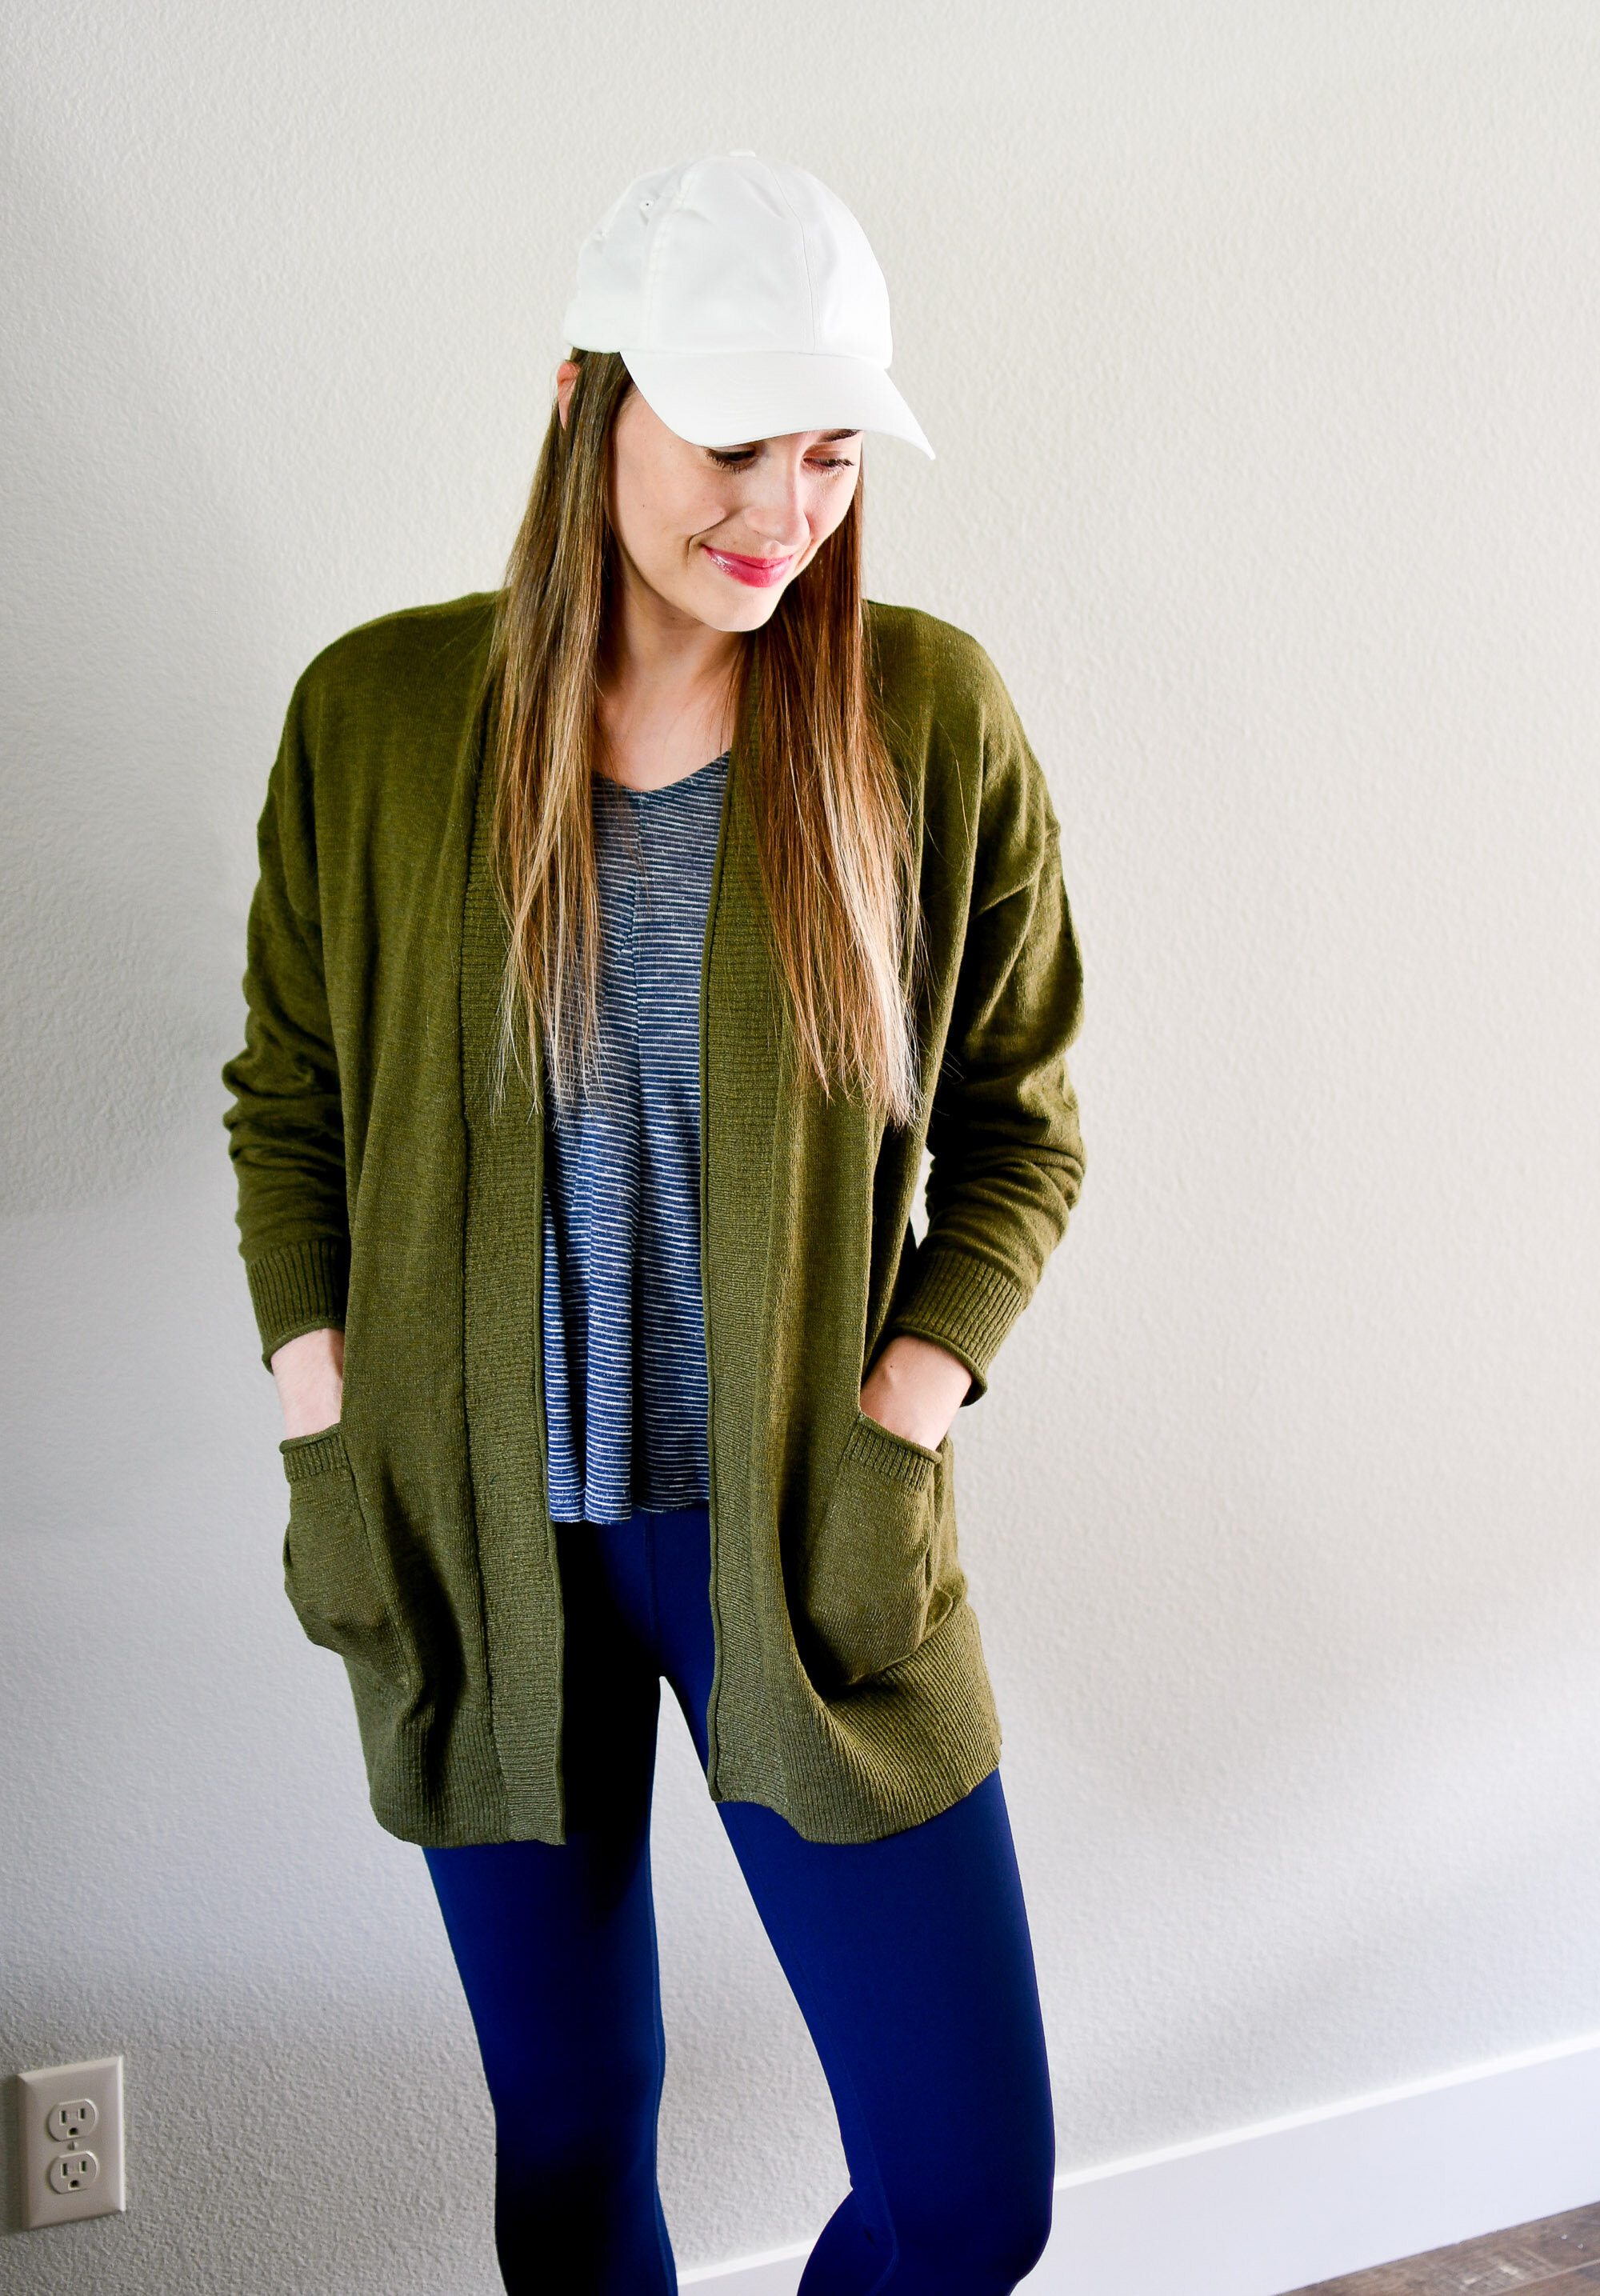 Casual spring outfit with white baseball cap, green cardigan, navy striped top — Cotton Cashmere Cat Hair